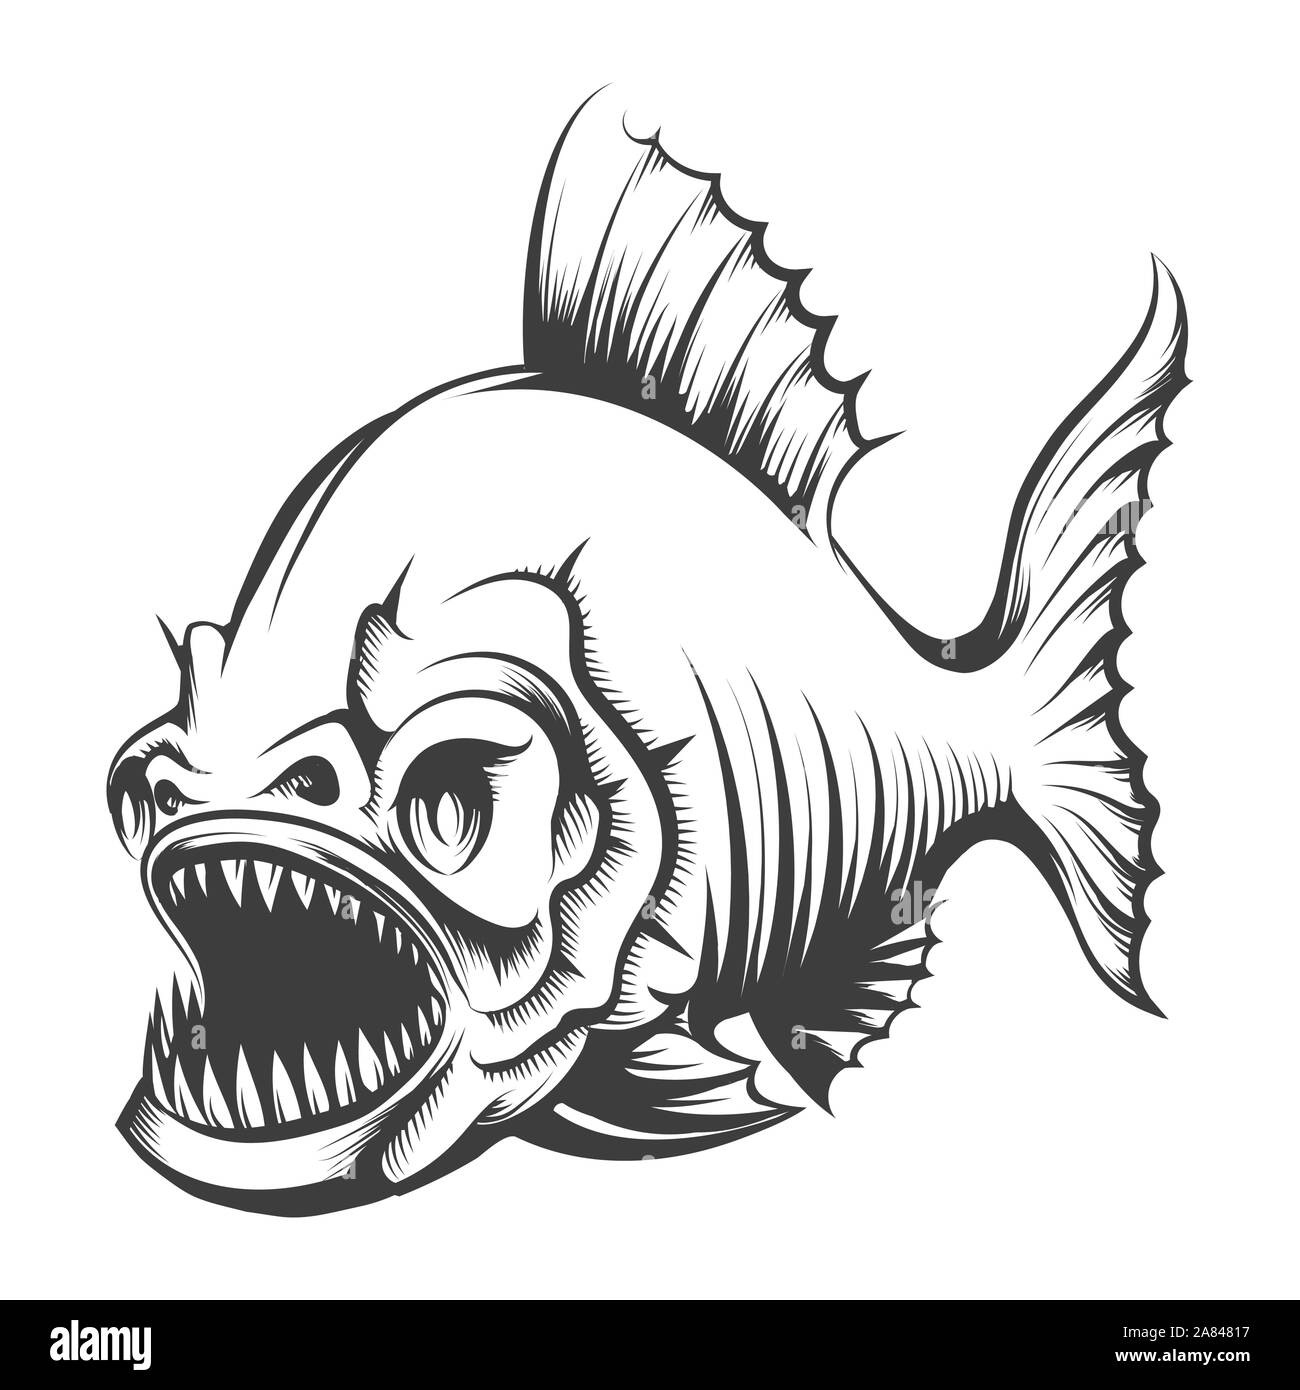 Piranha Fish in Engraving style isolated on white. Vector illustration. Stock Vector